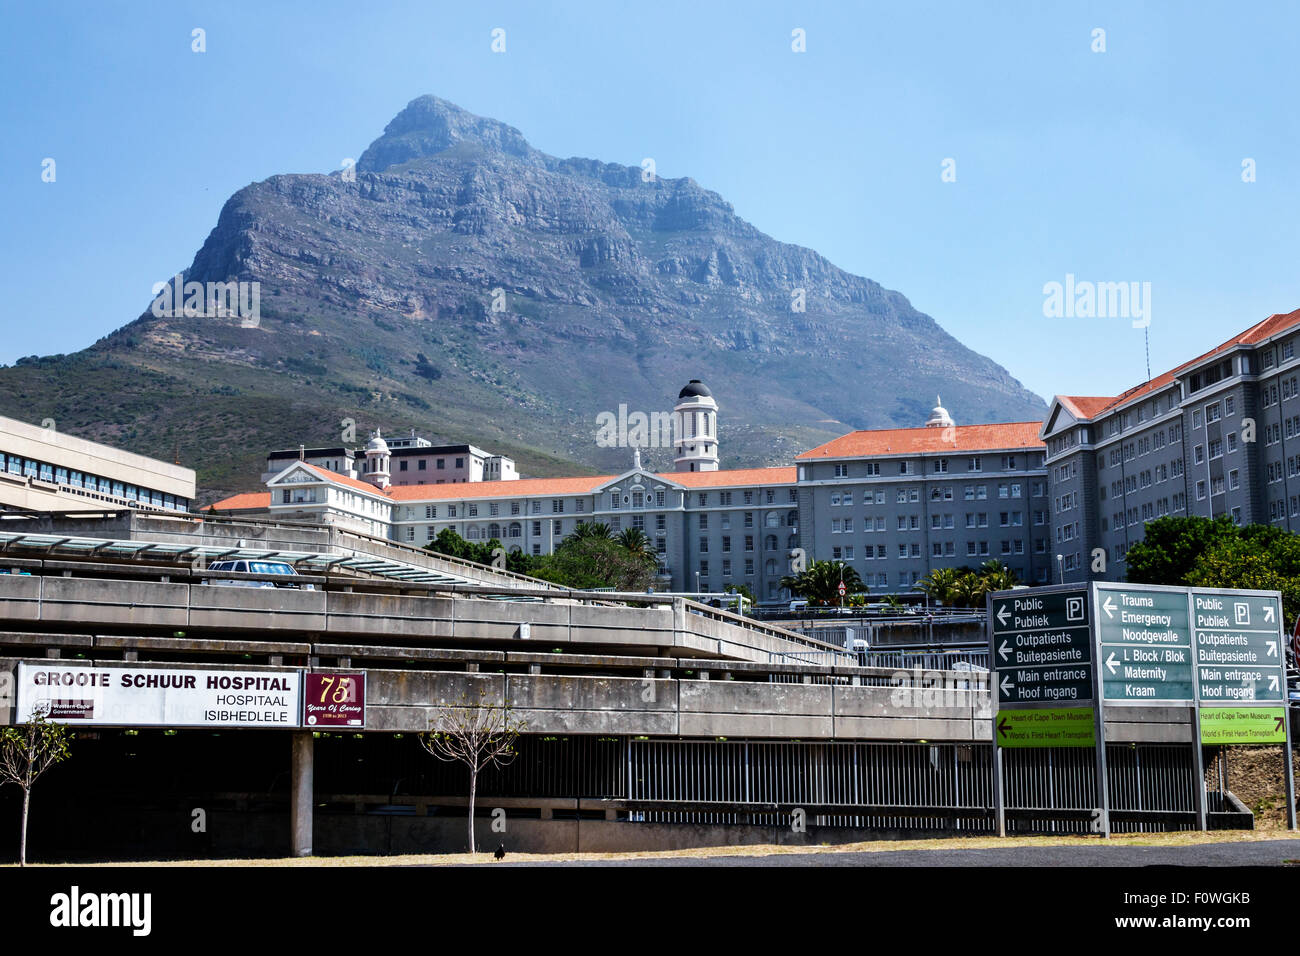 Cape Town South Africa,Salt River,Groote Schuur Hospital,Heart of Cape Town Museum,Table Mountain National Park,SAfri150311022 Stock Photo